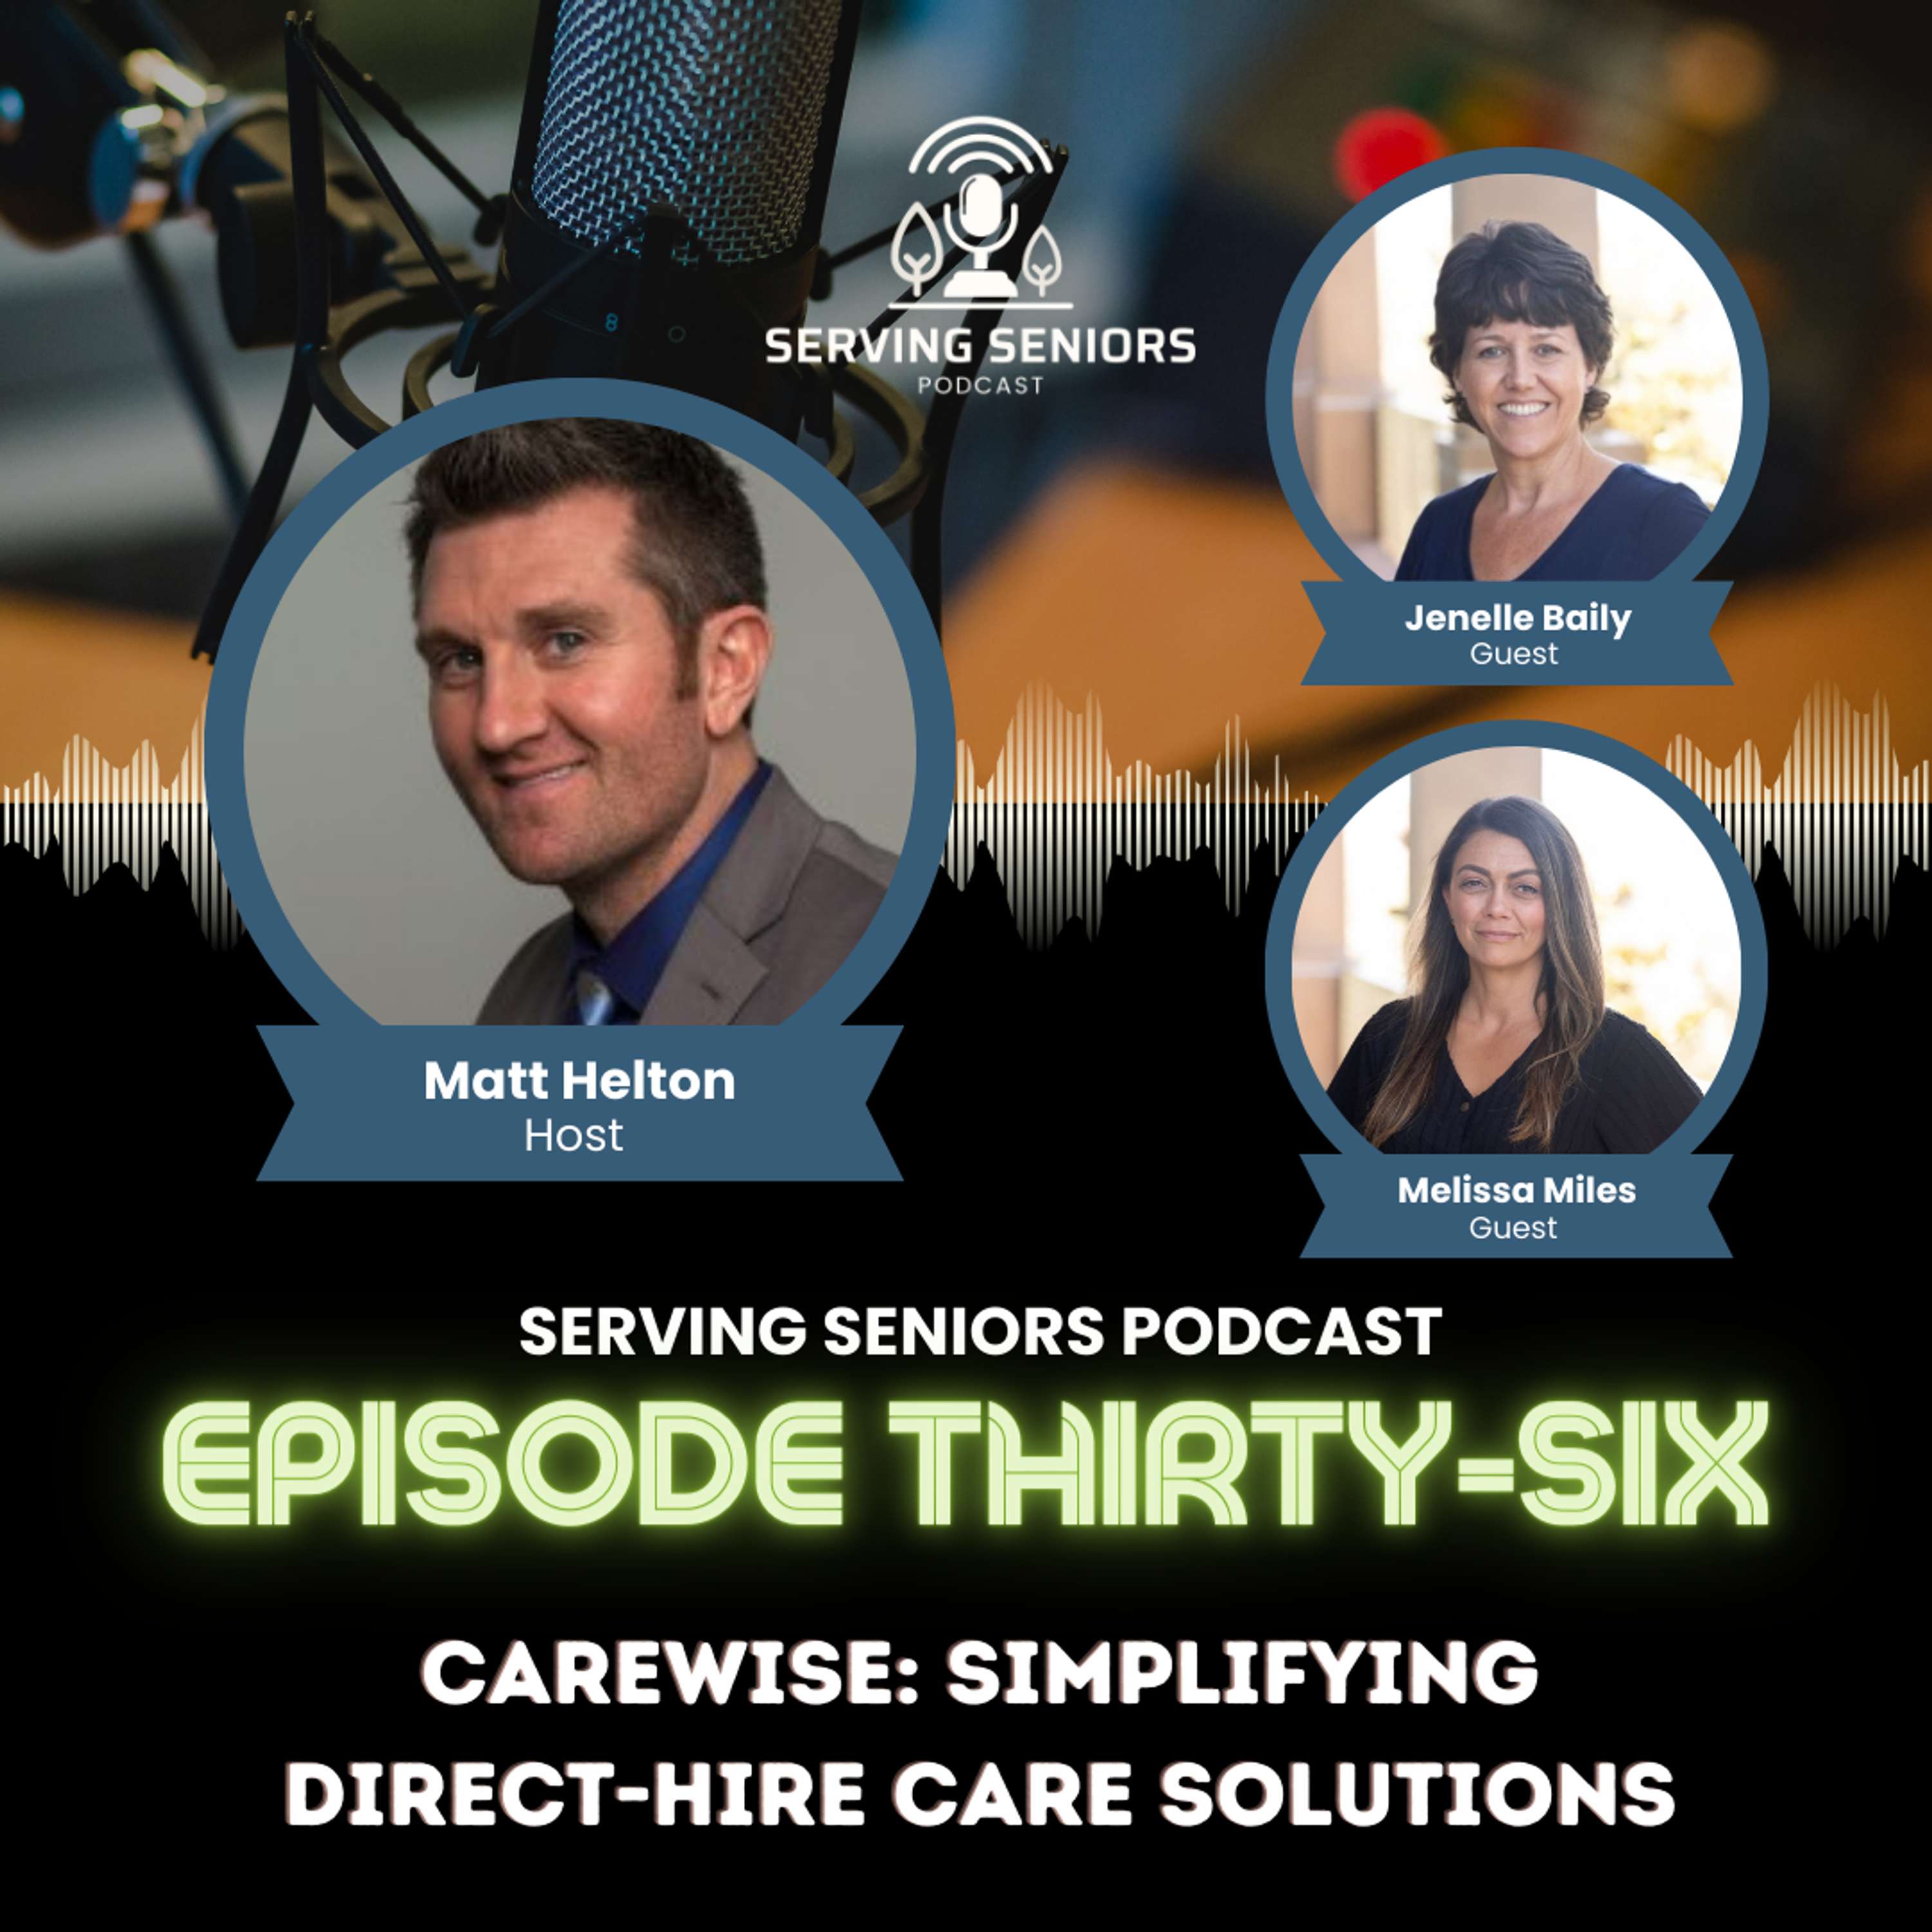 Episode 36: CareWise: Simplifying Direct-Hire Care Solutions